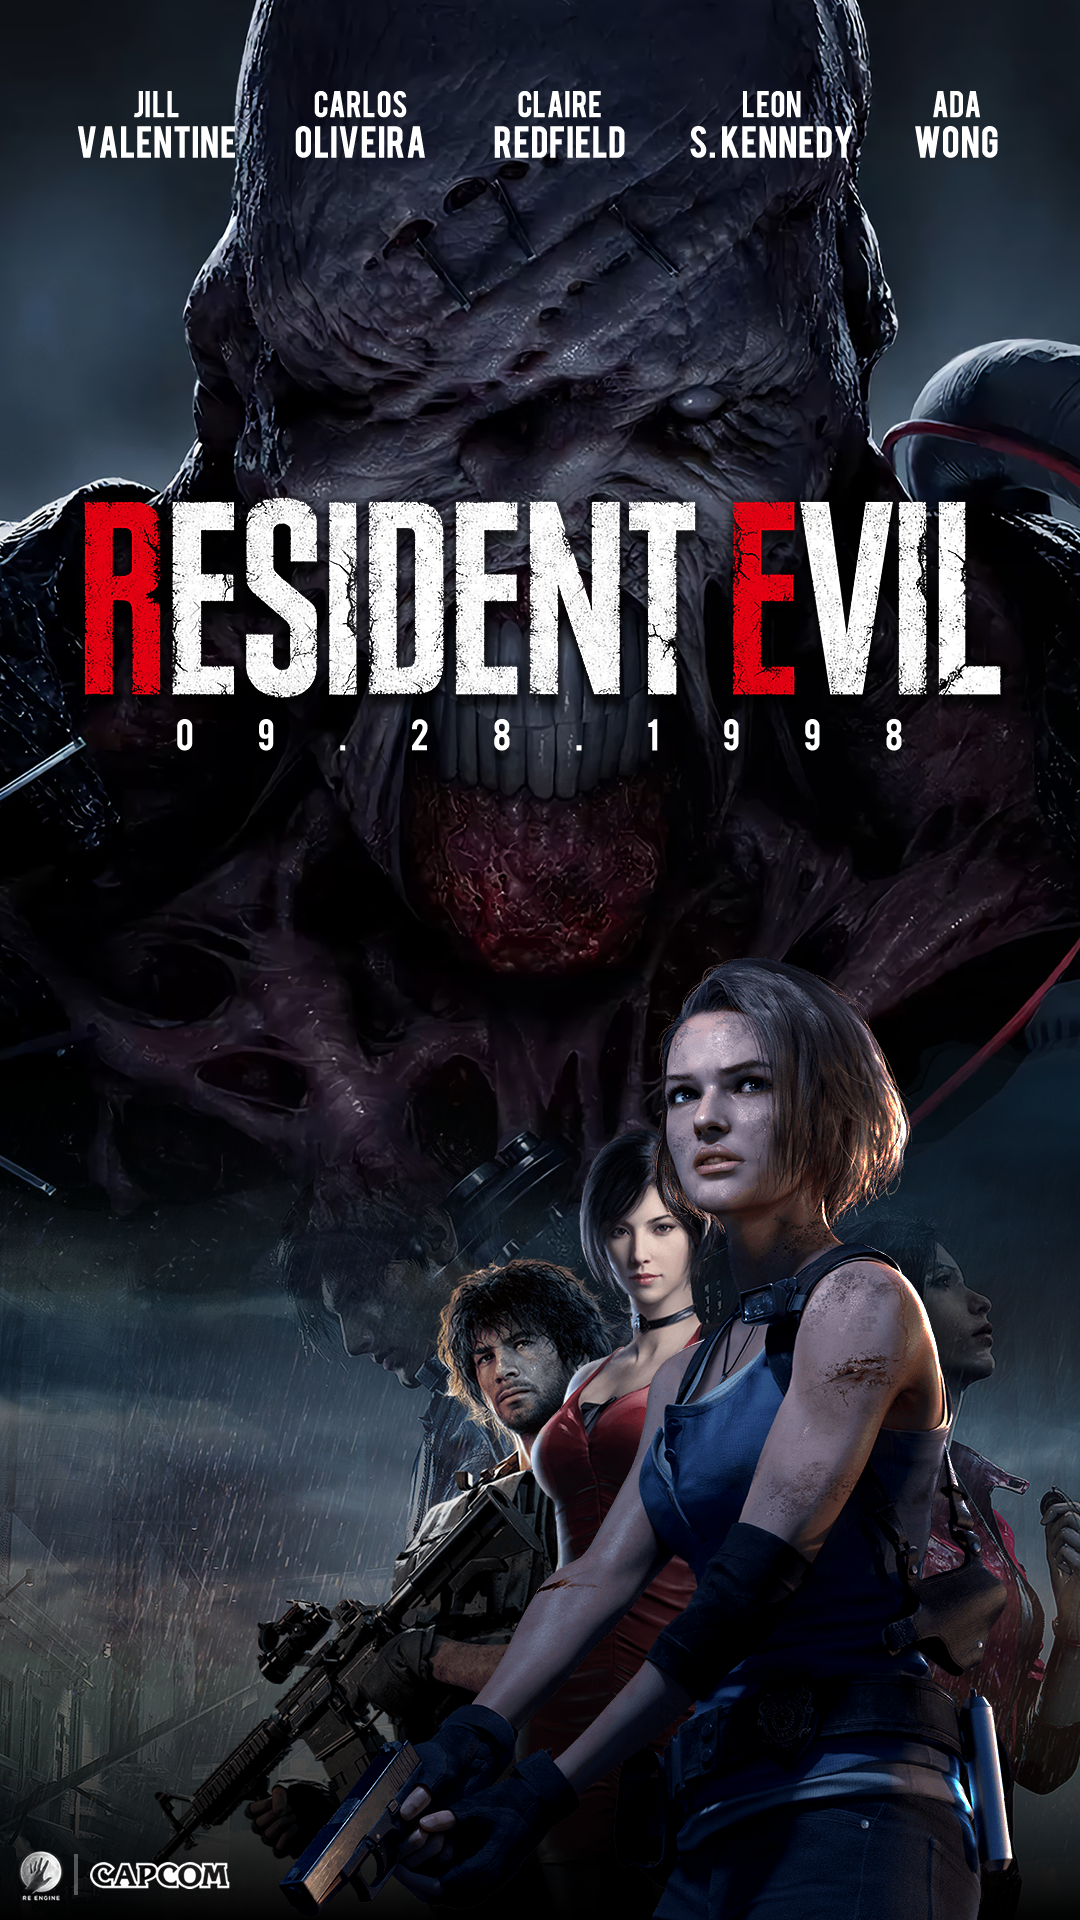 Resident evil movie poster with ada and chainsaw